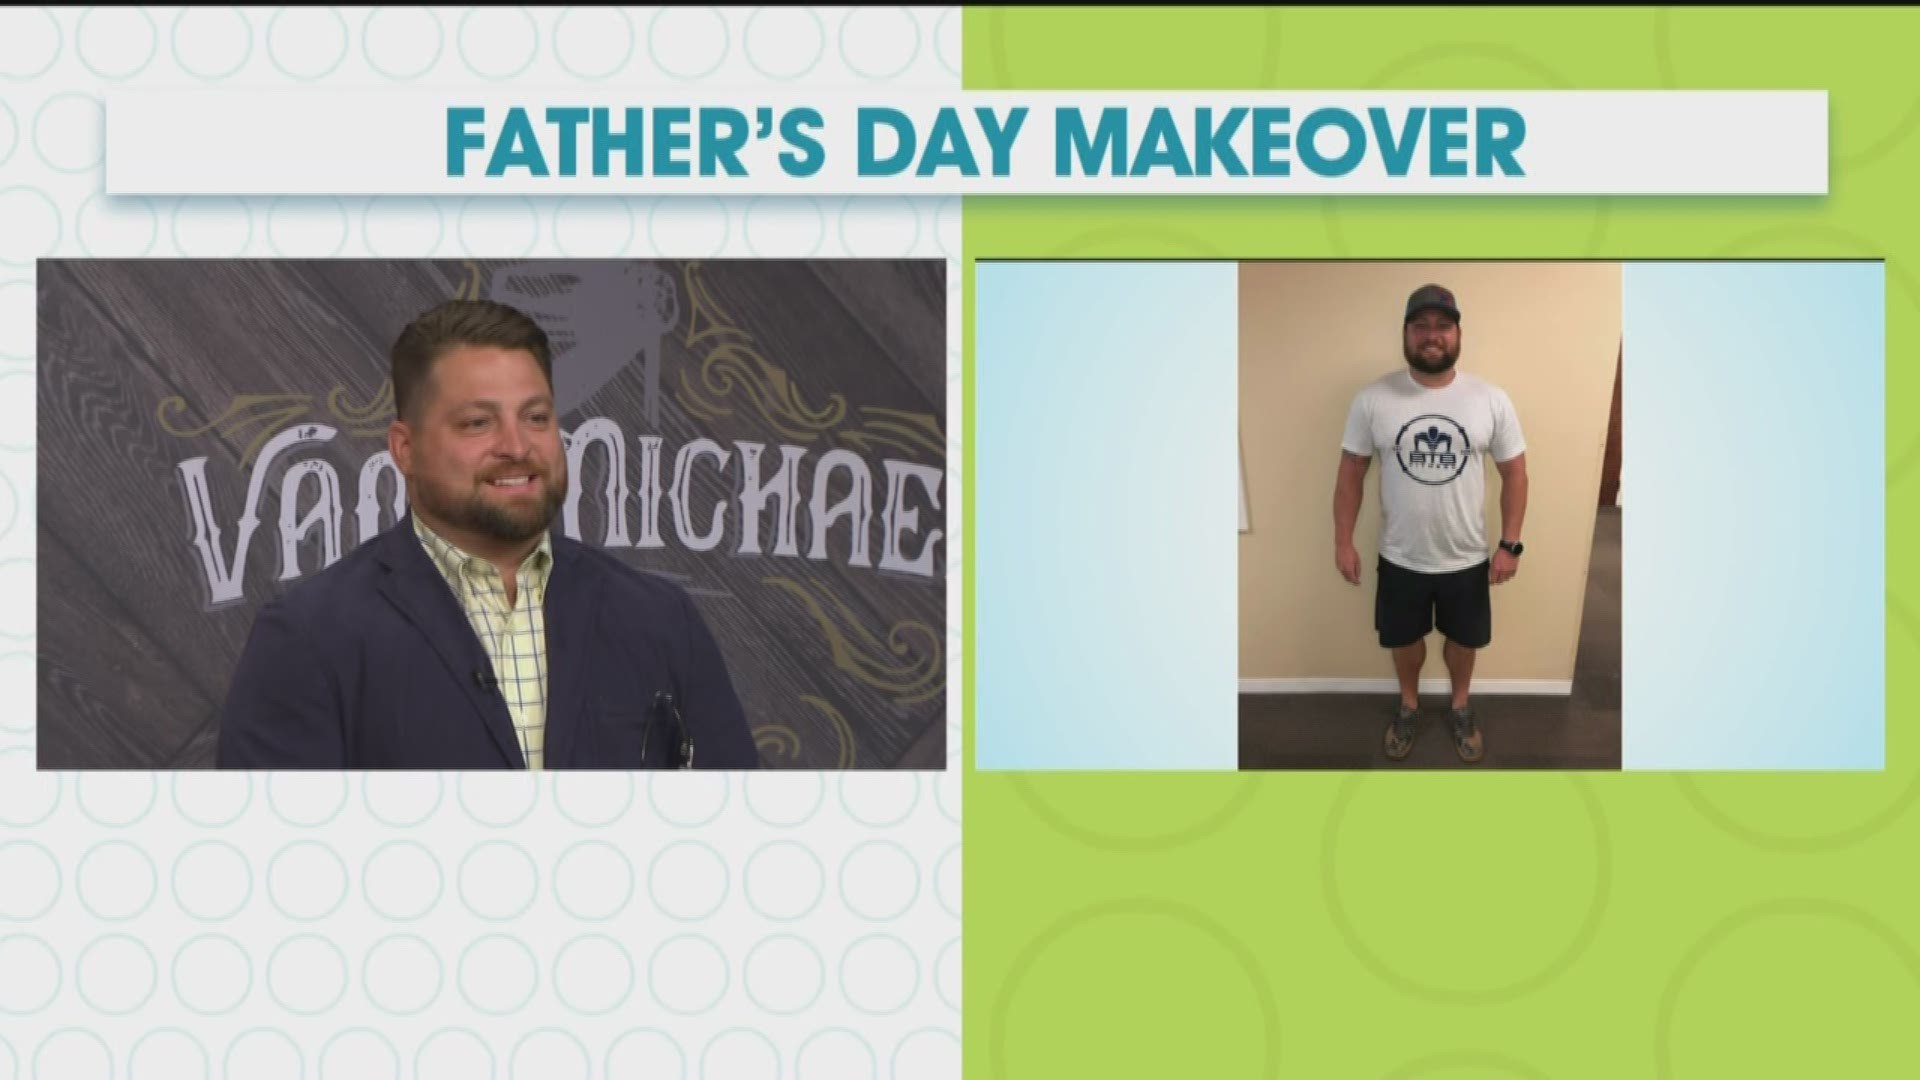 We makeover deserving dad Nick Gecsy with a fresh cut from Van Michael Men and wardrobe from Orvis.